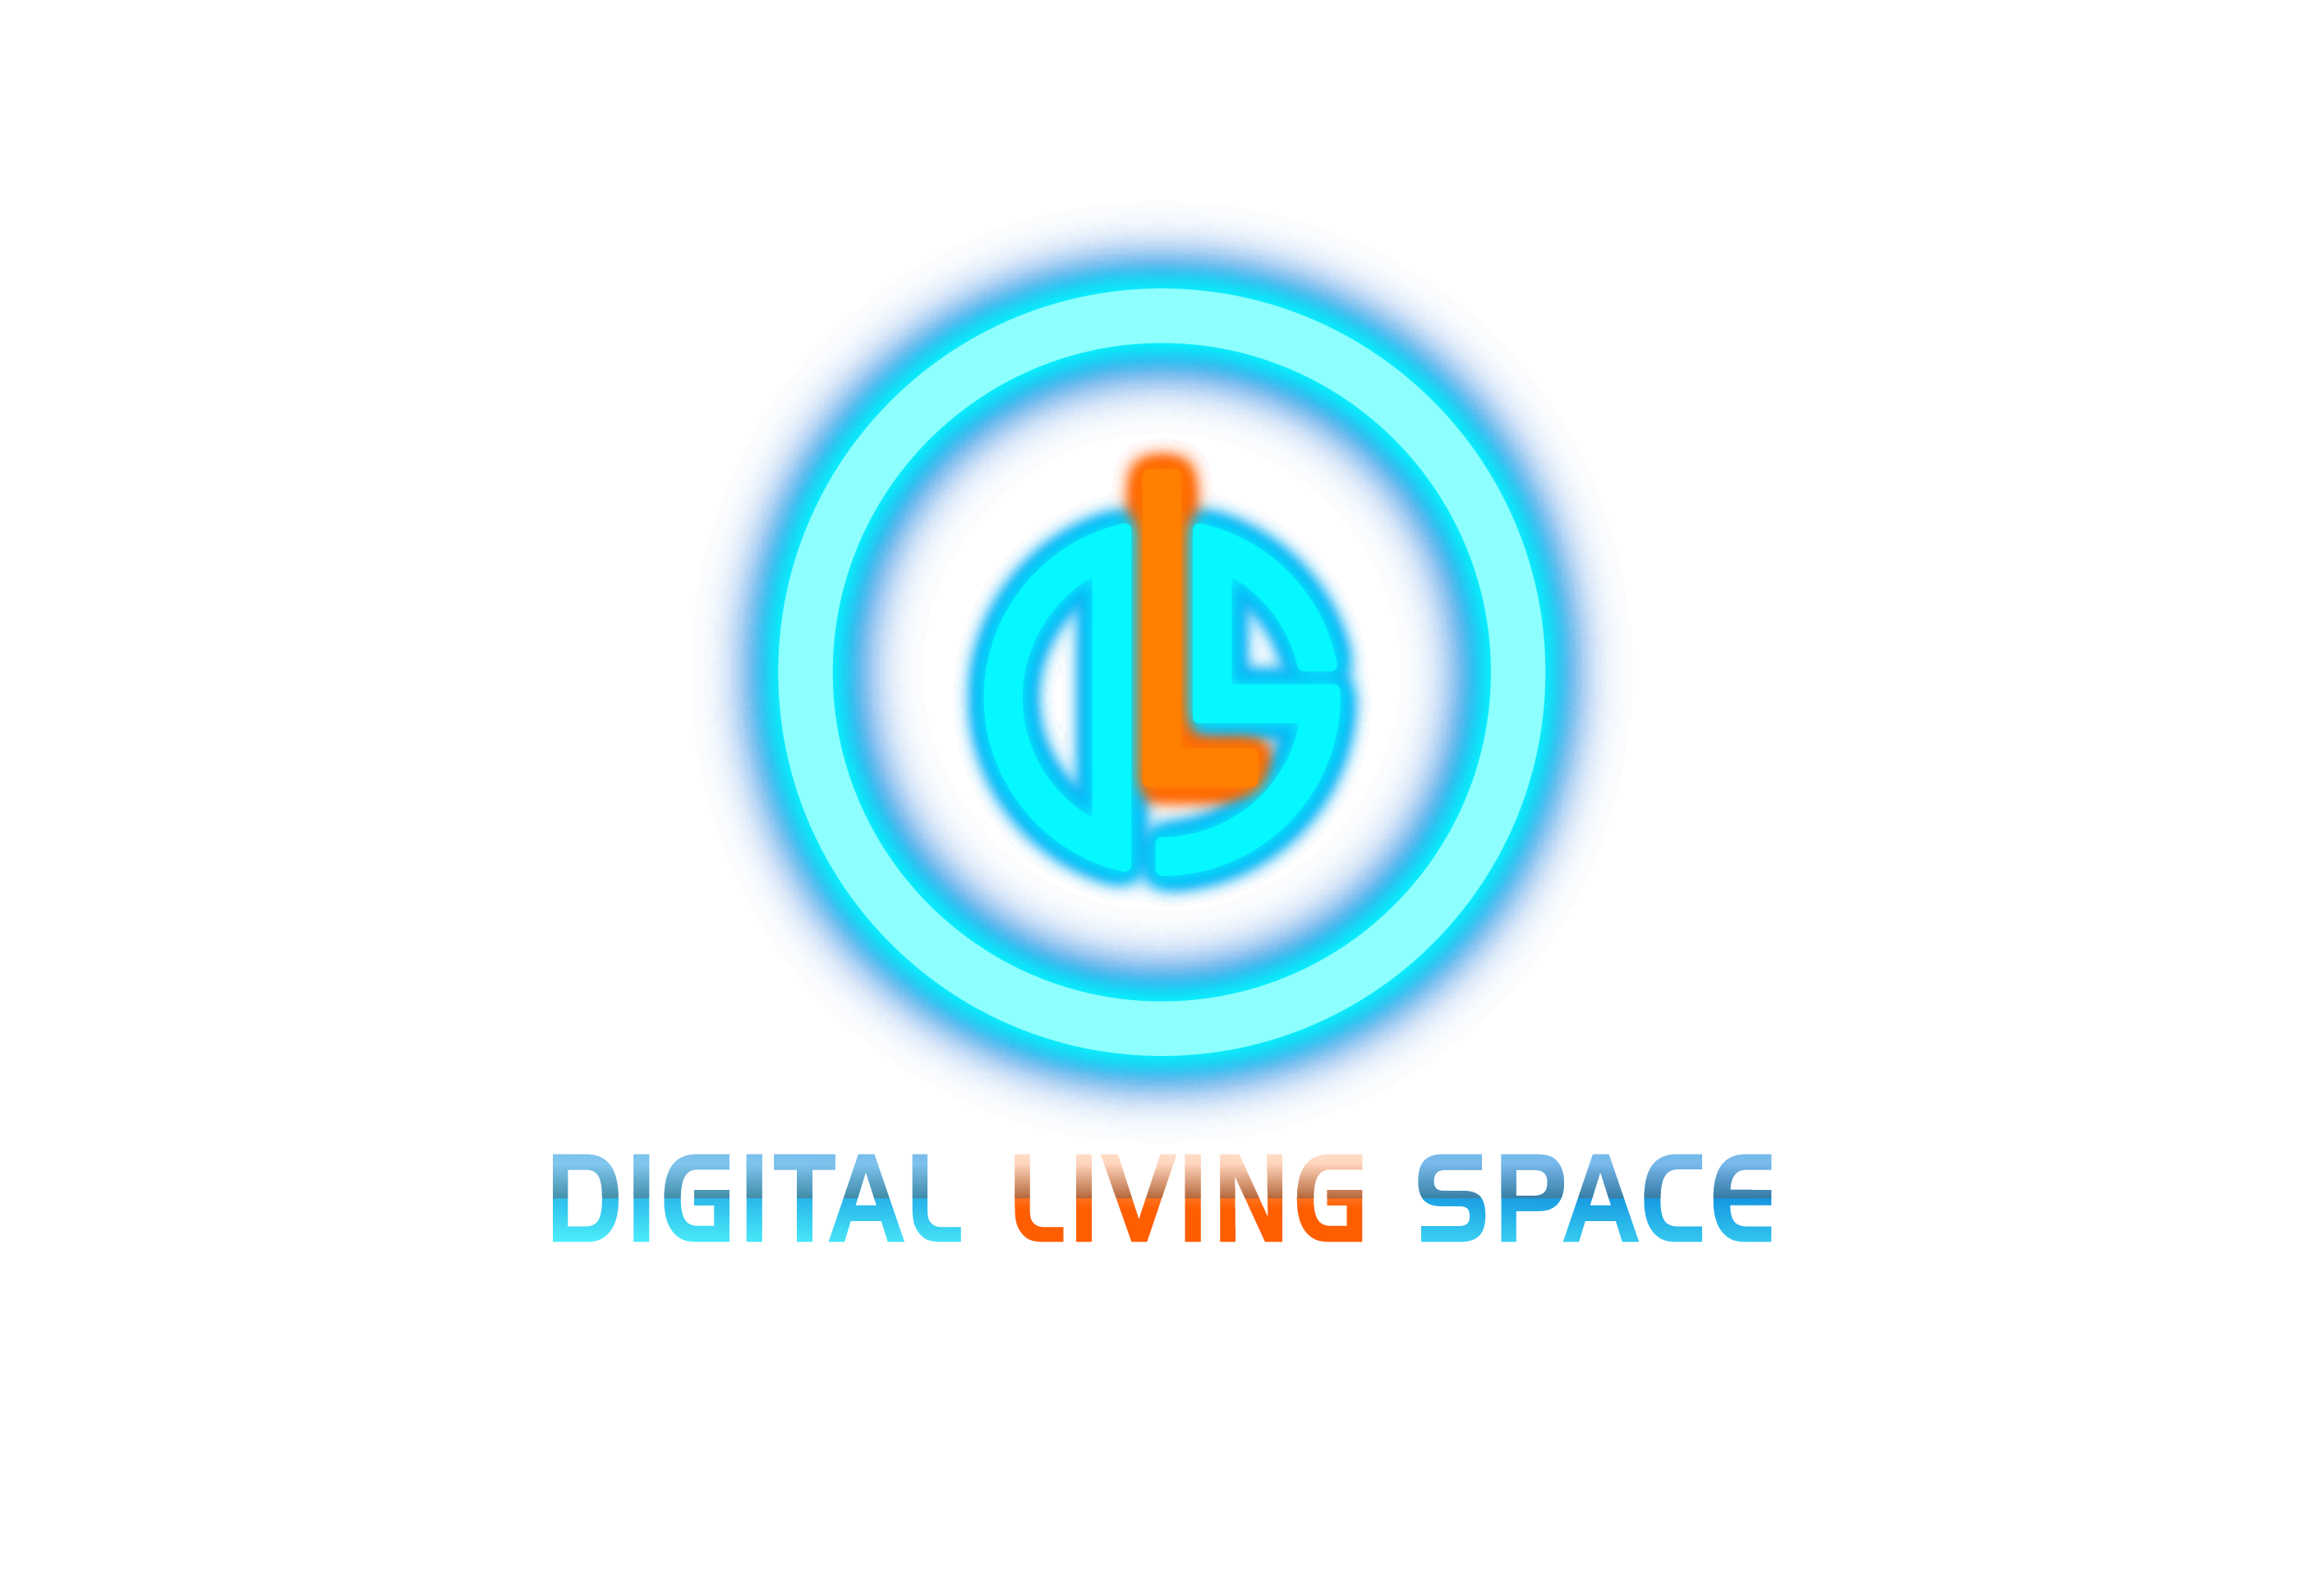 Digital Living Space – Branded Animation Video